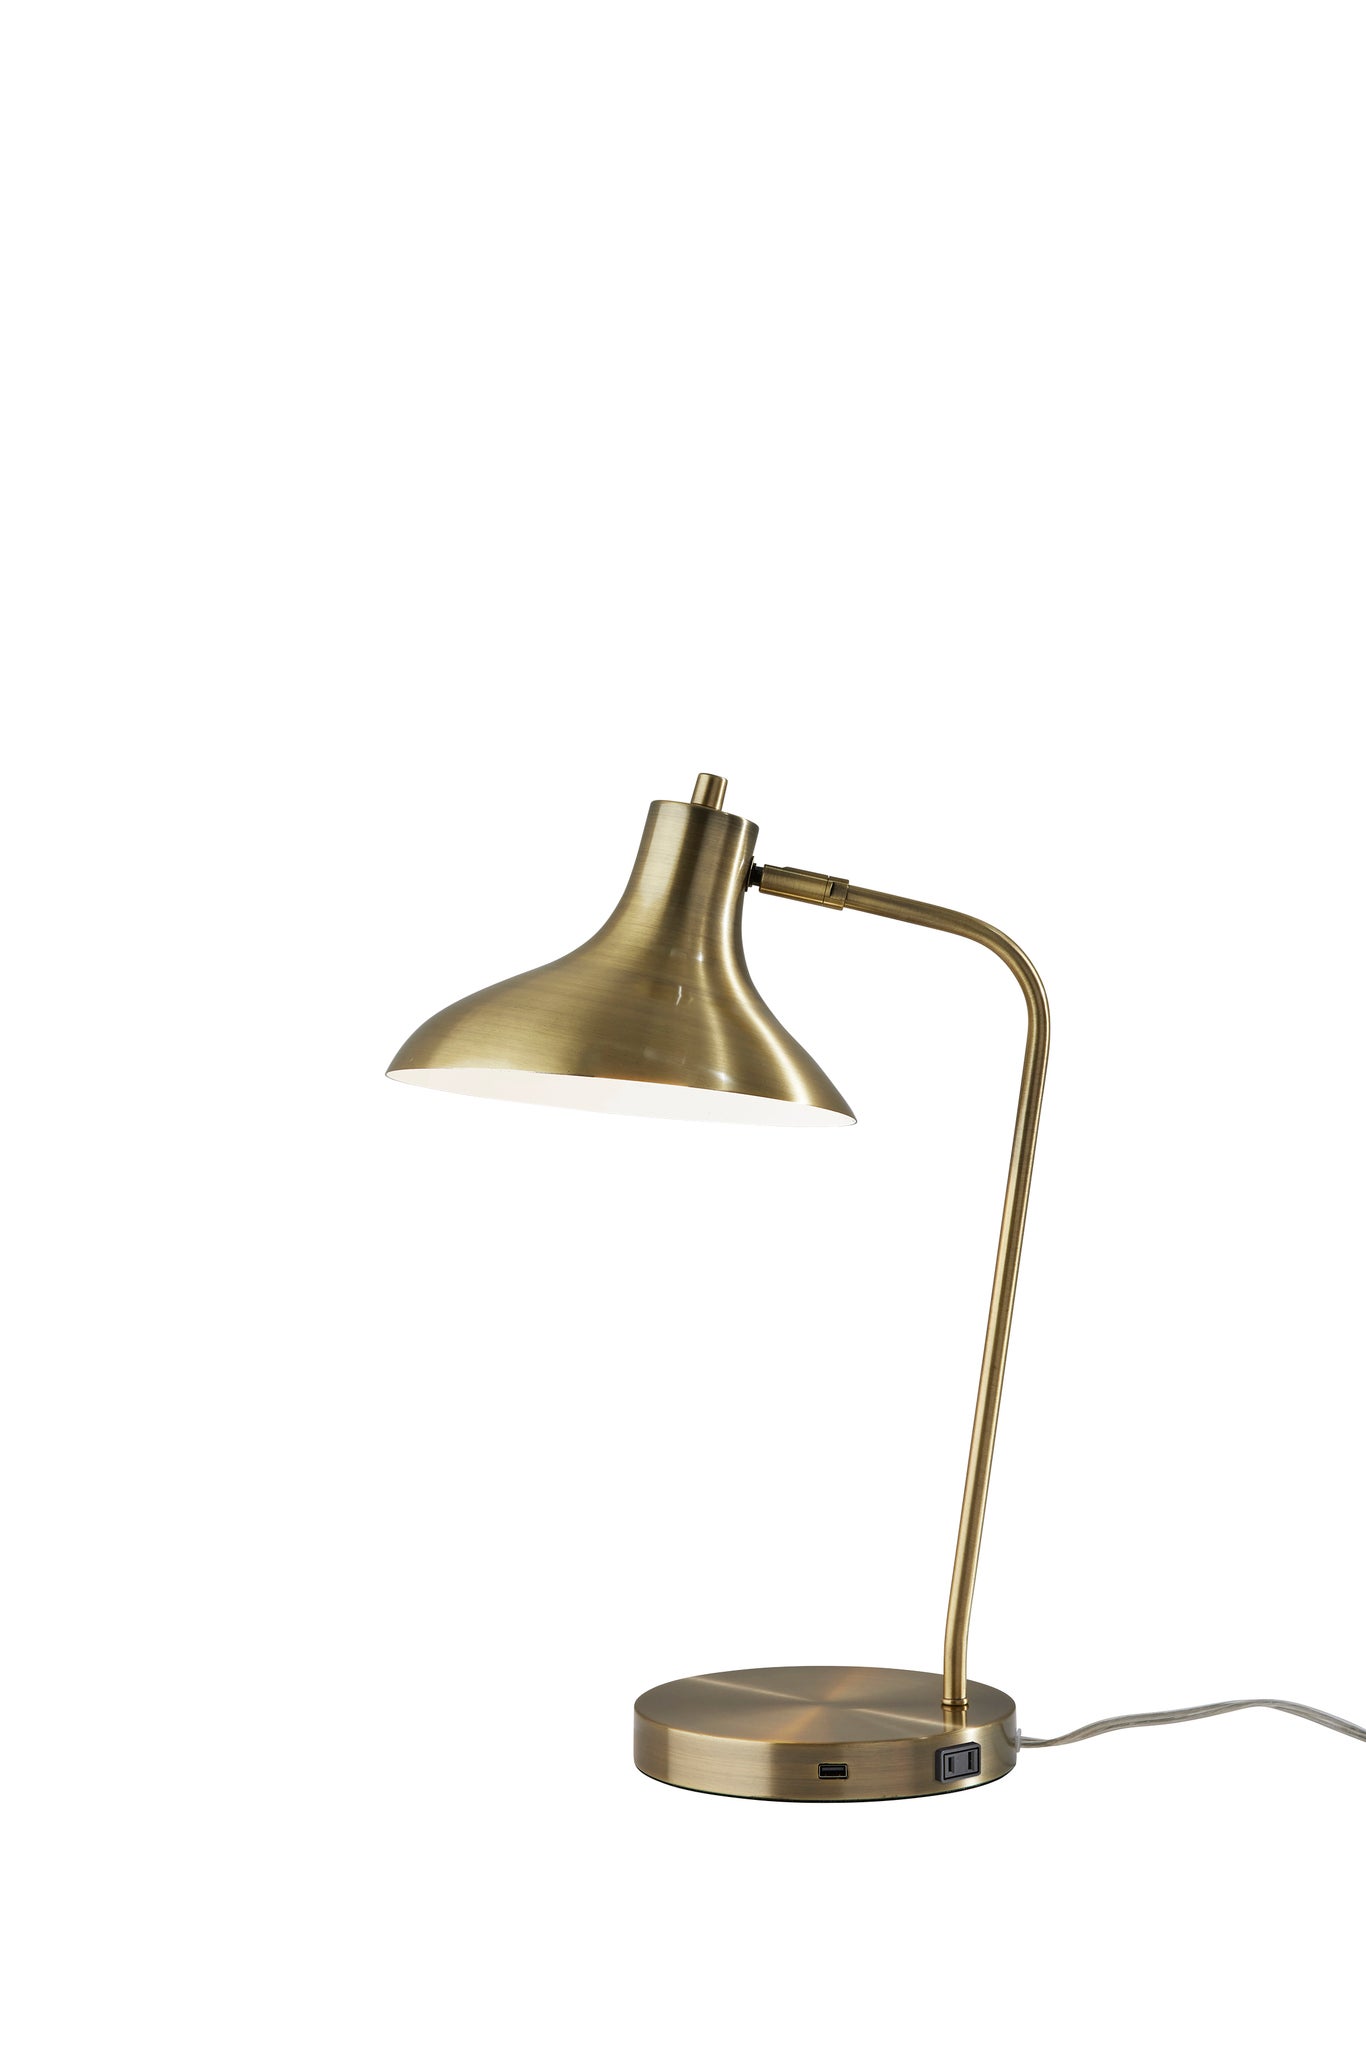 Black Office Desk Lamp with Vintage Design by Zuo 